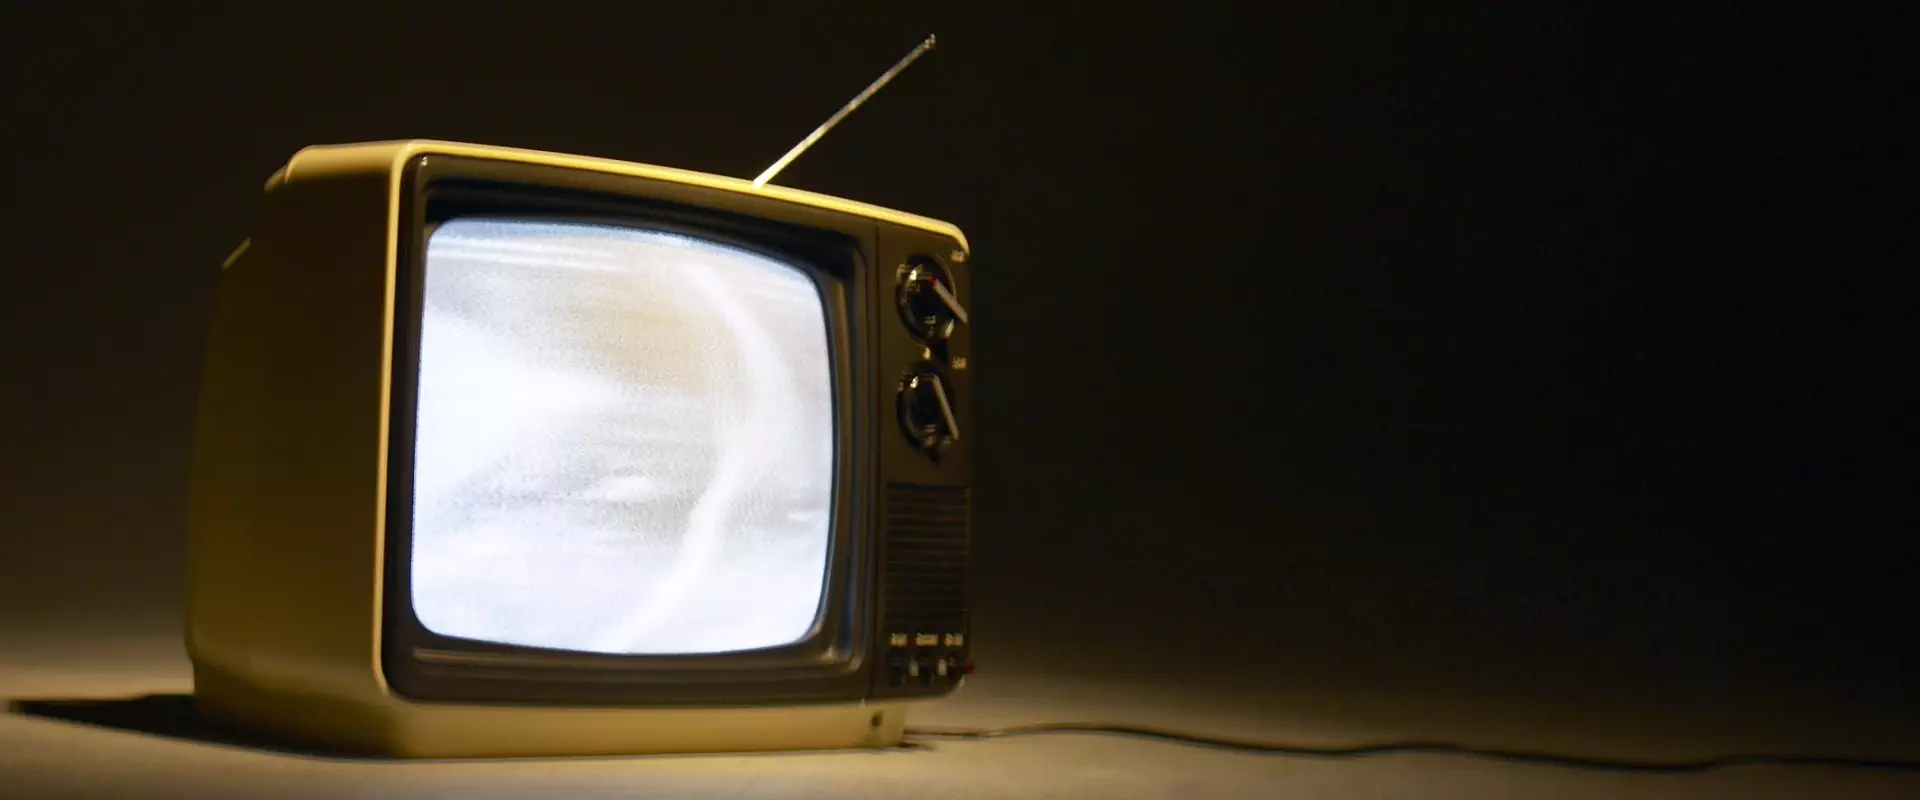 Does the renter’s insurance cover a broken television?